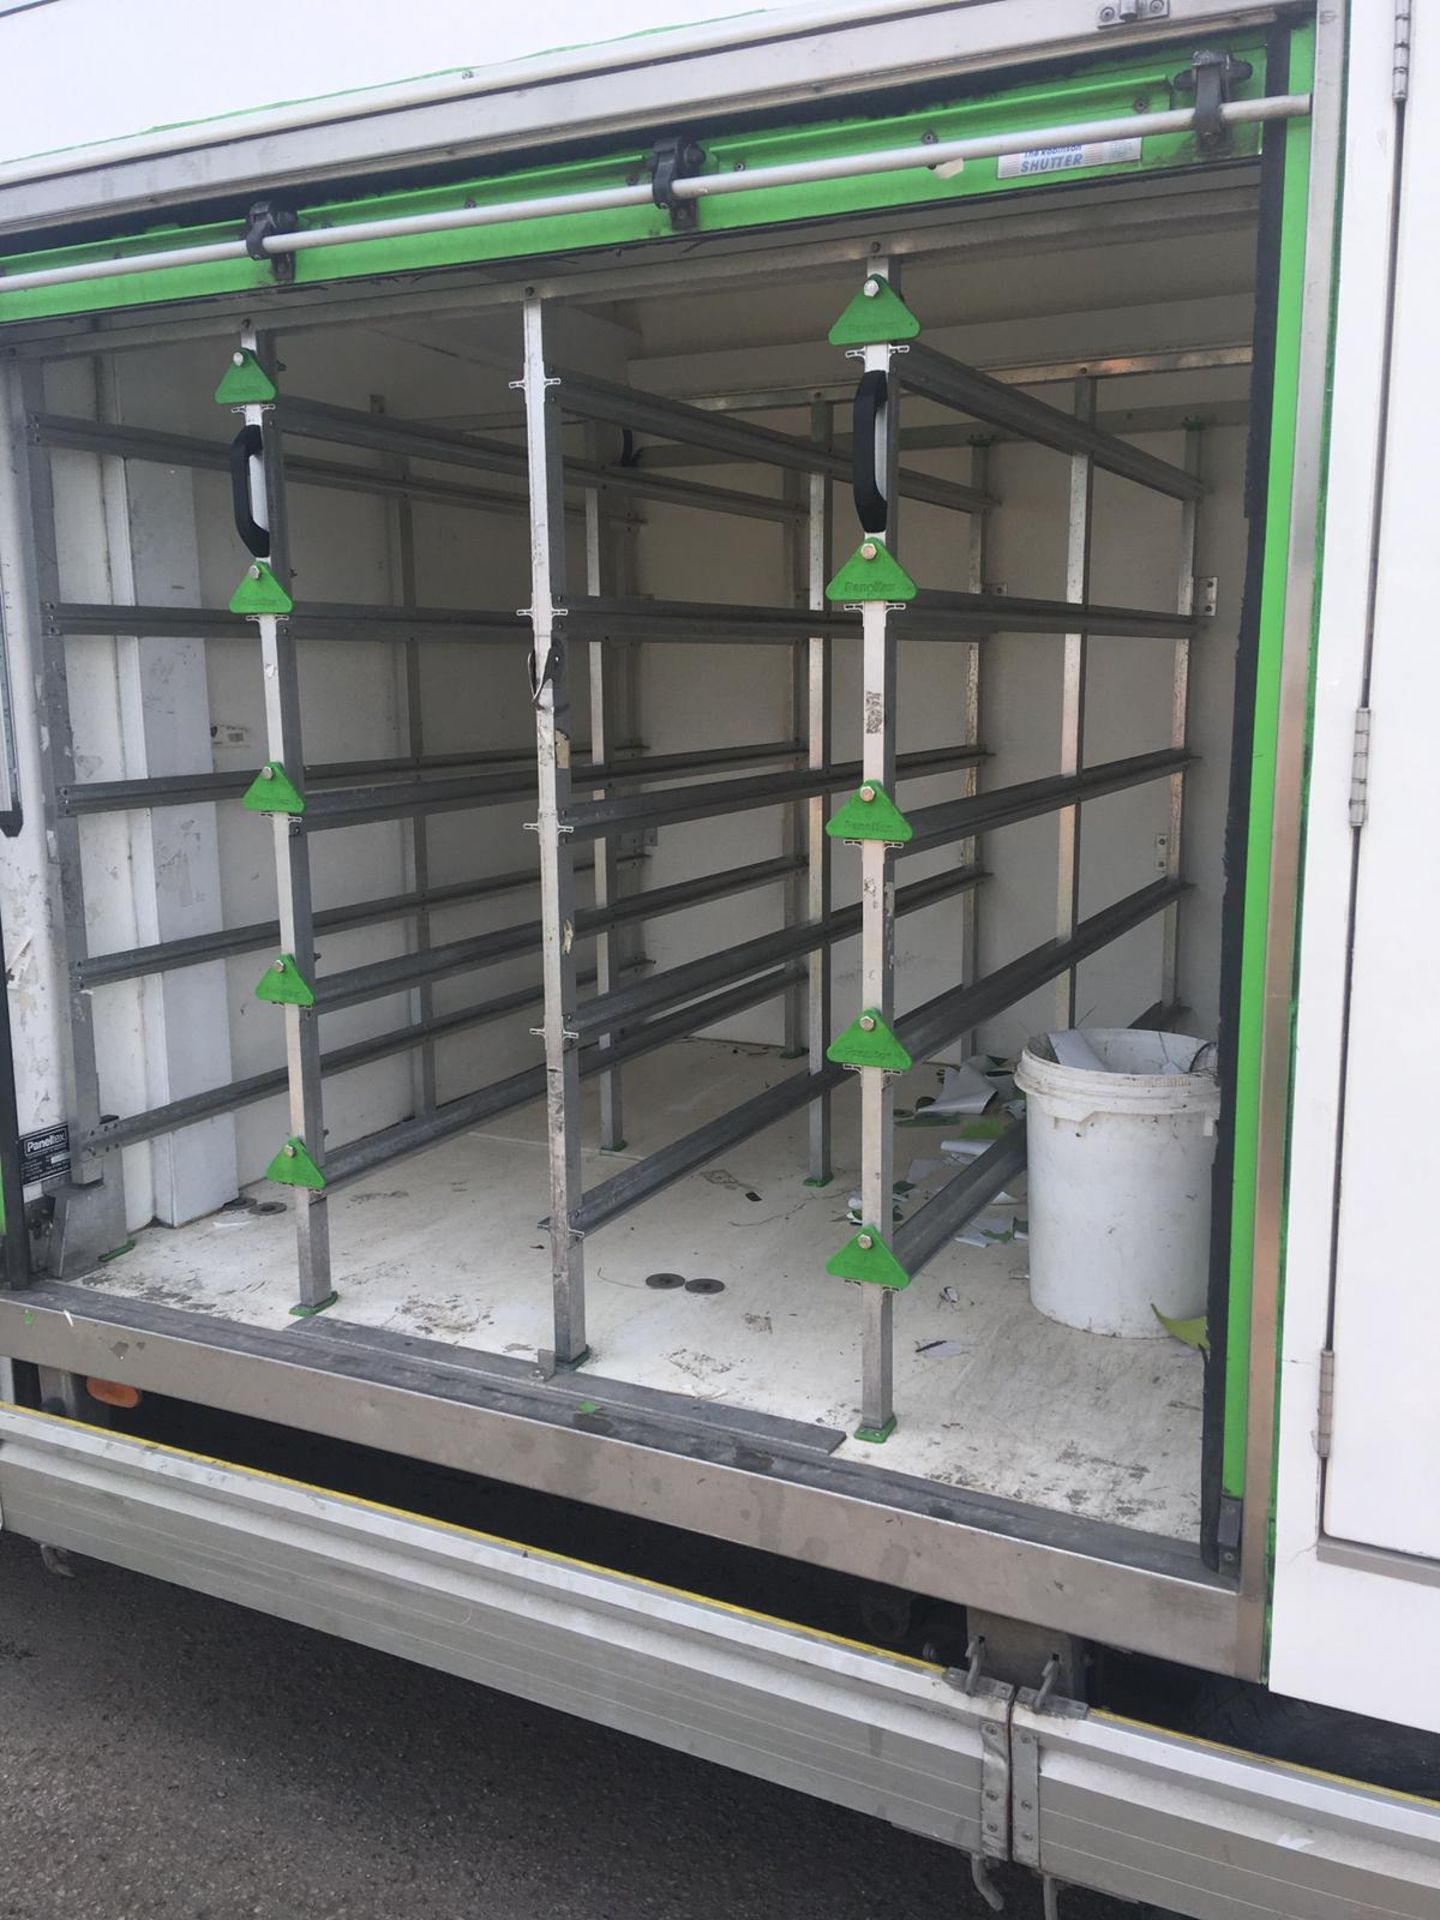 EX SUPERMARKET GAH REFRIGERATION REAR BOX UNIT, ROLLER SHUTTER DOOR, YOU'RE BIDDING FOR THE BOX ONLY - Image 7 of 10